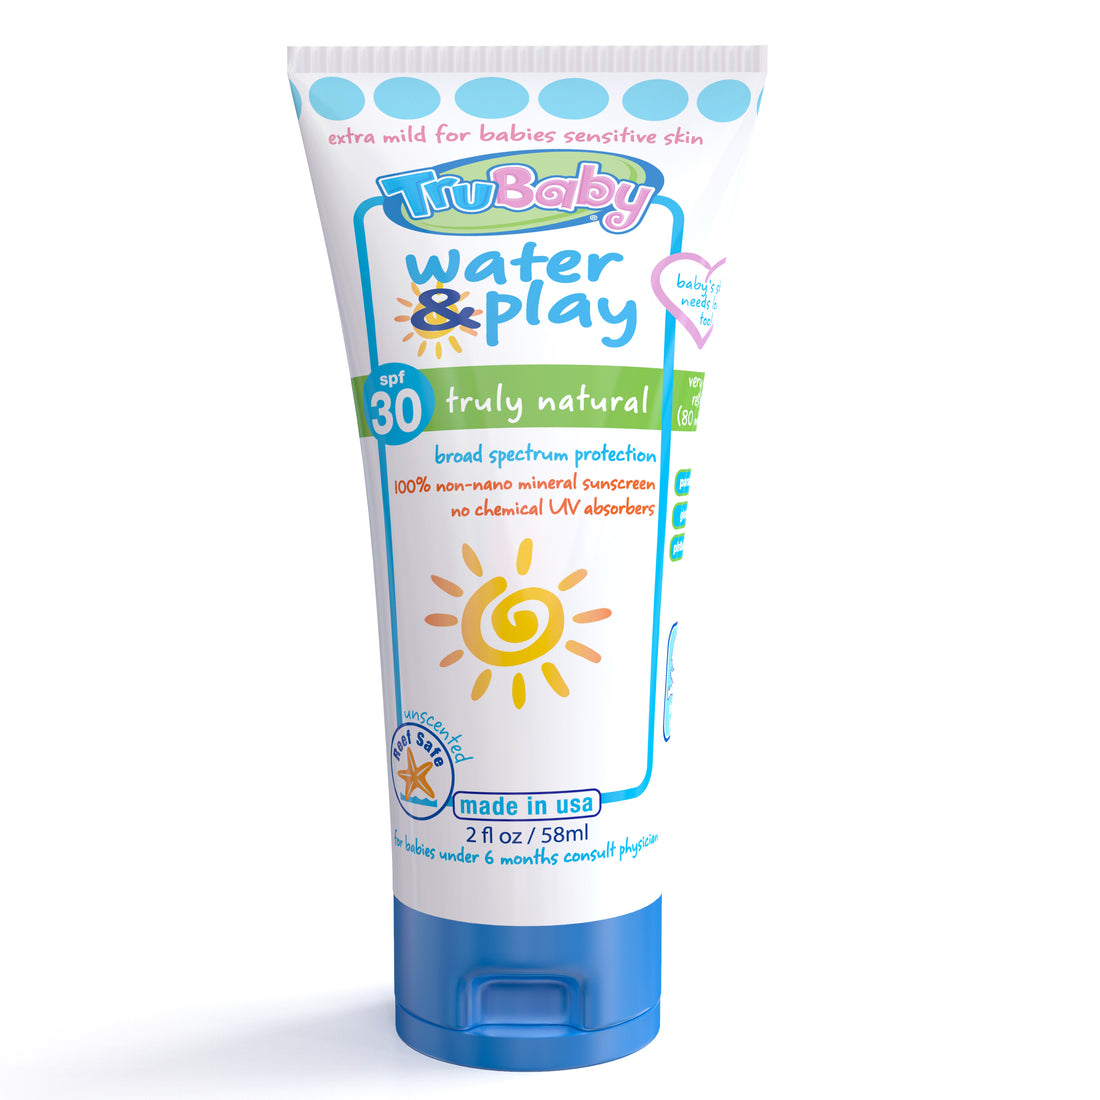 TruBaby Water & Play SPF 30 Broad Spectrum Protection